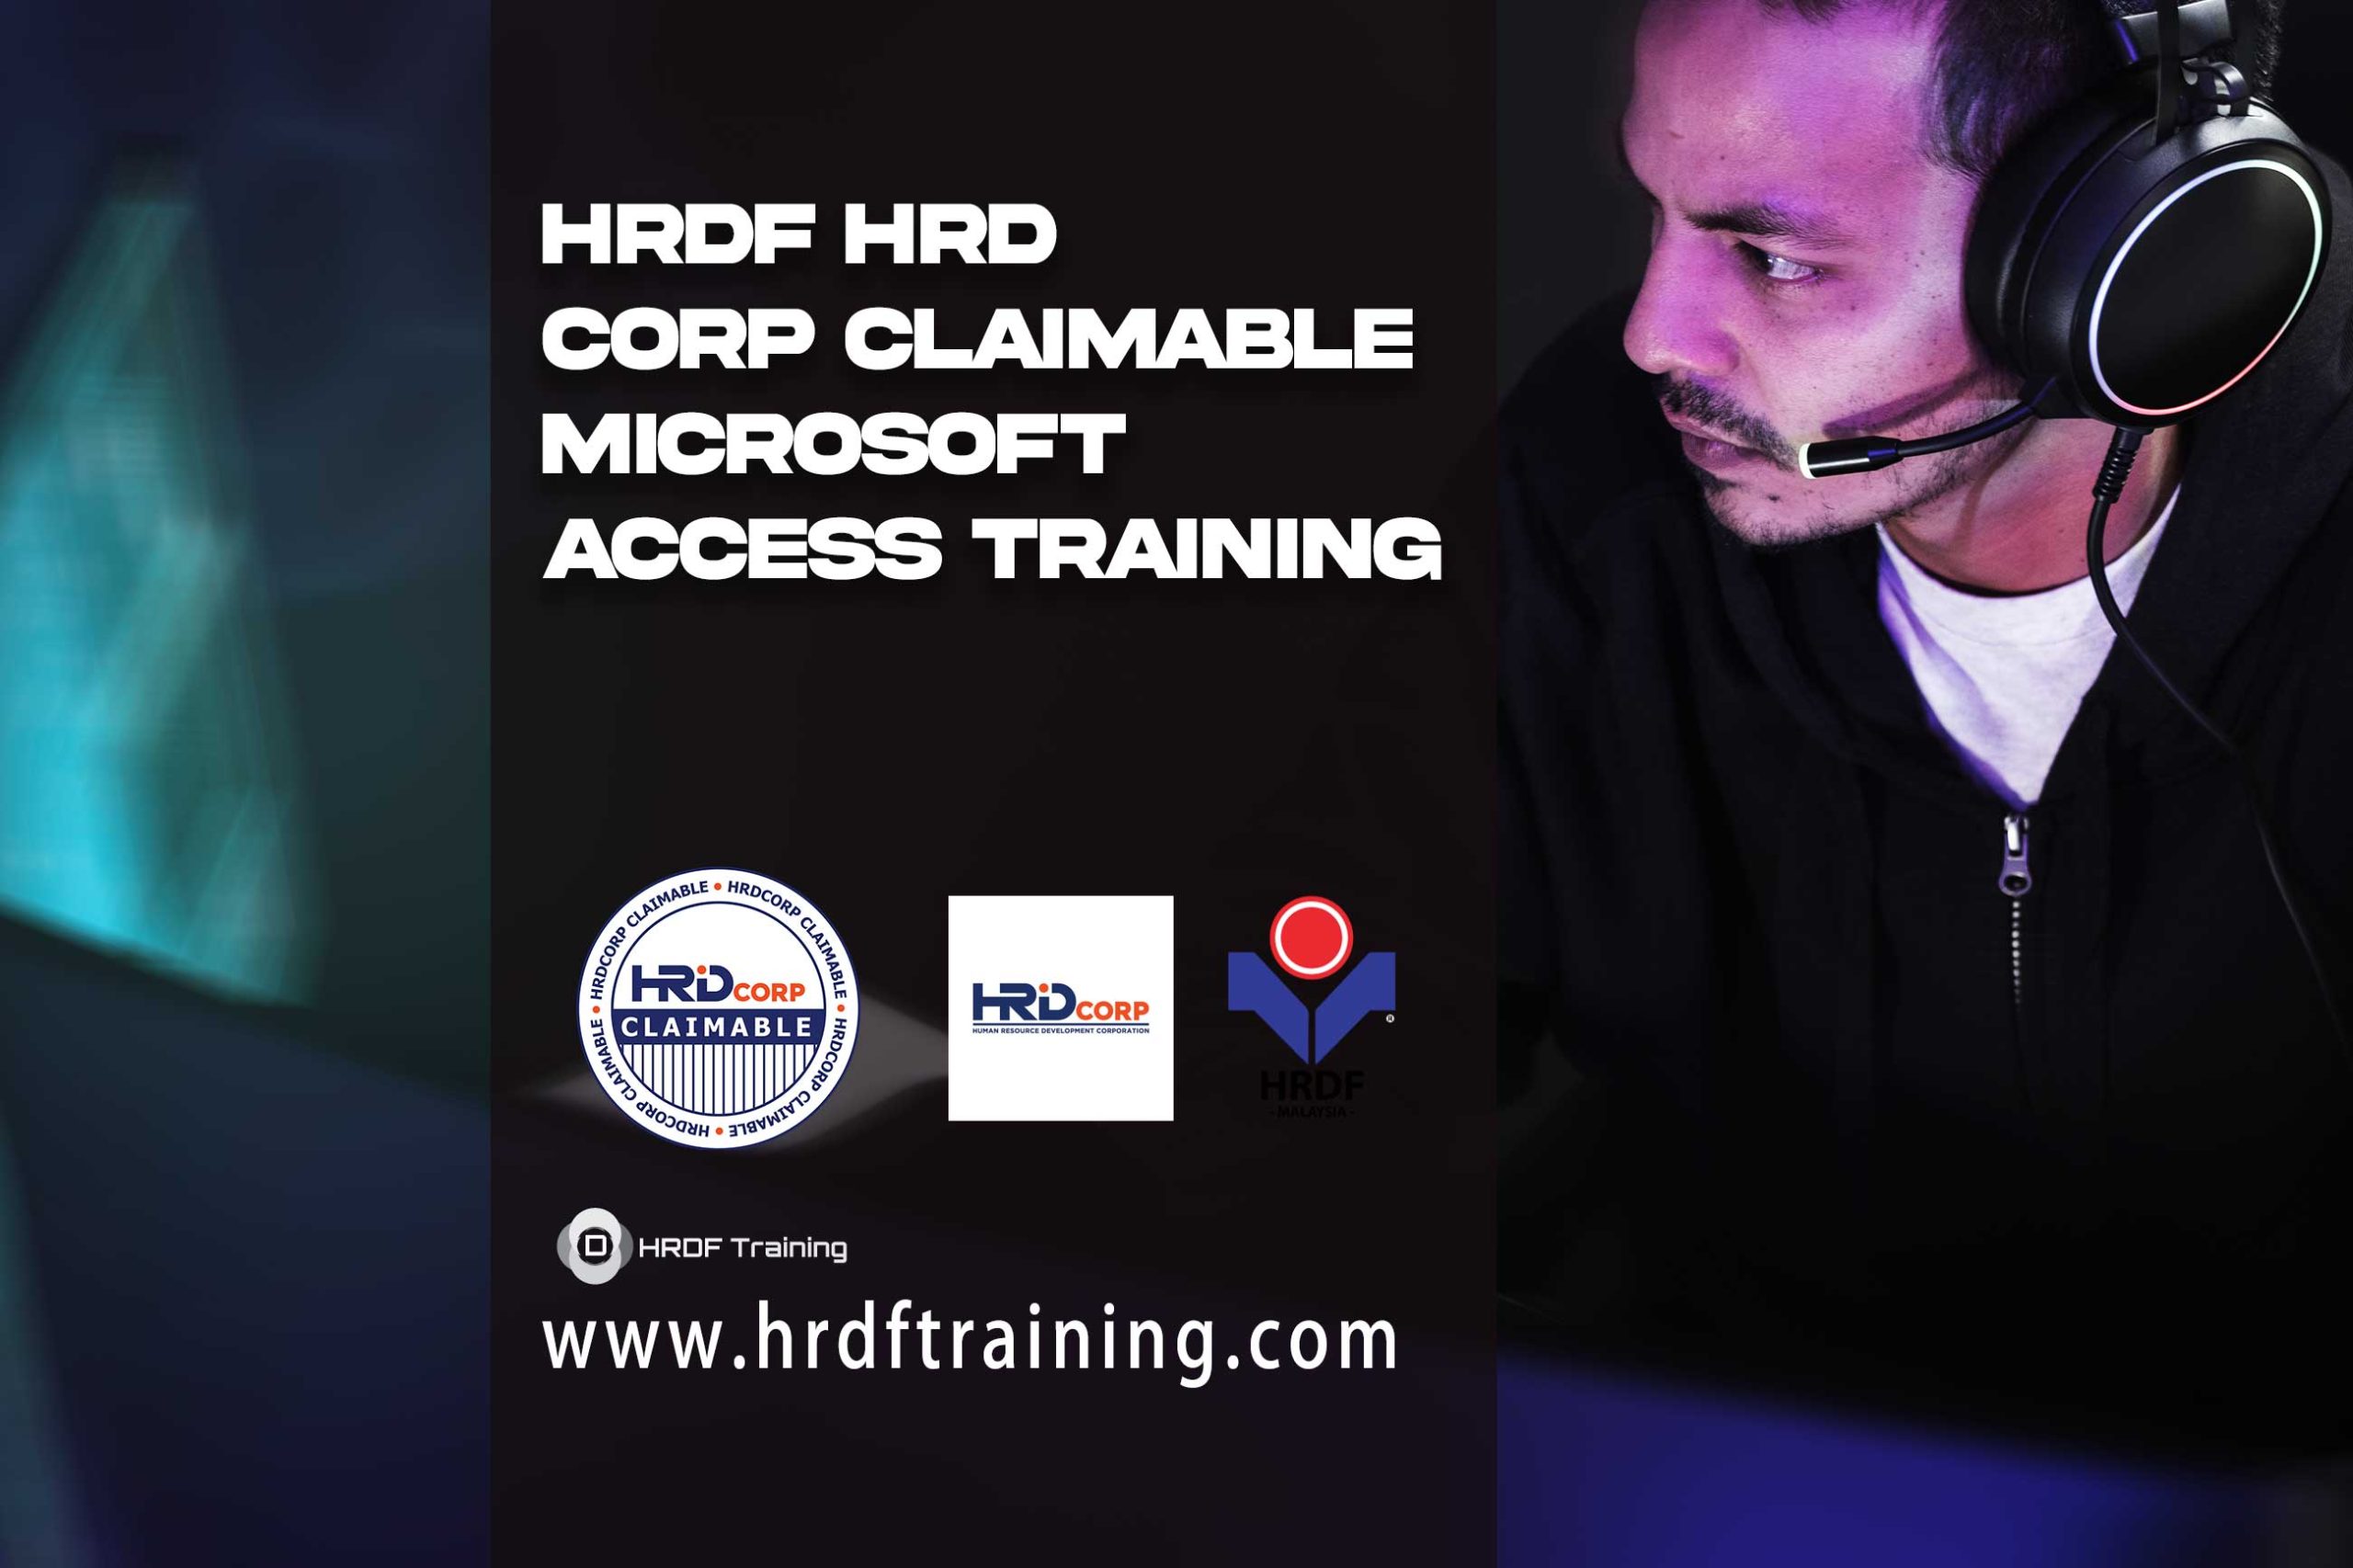 HRDF-HRD-Corp-Claimable-Microsoft-Access-training